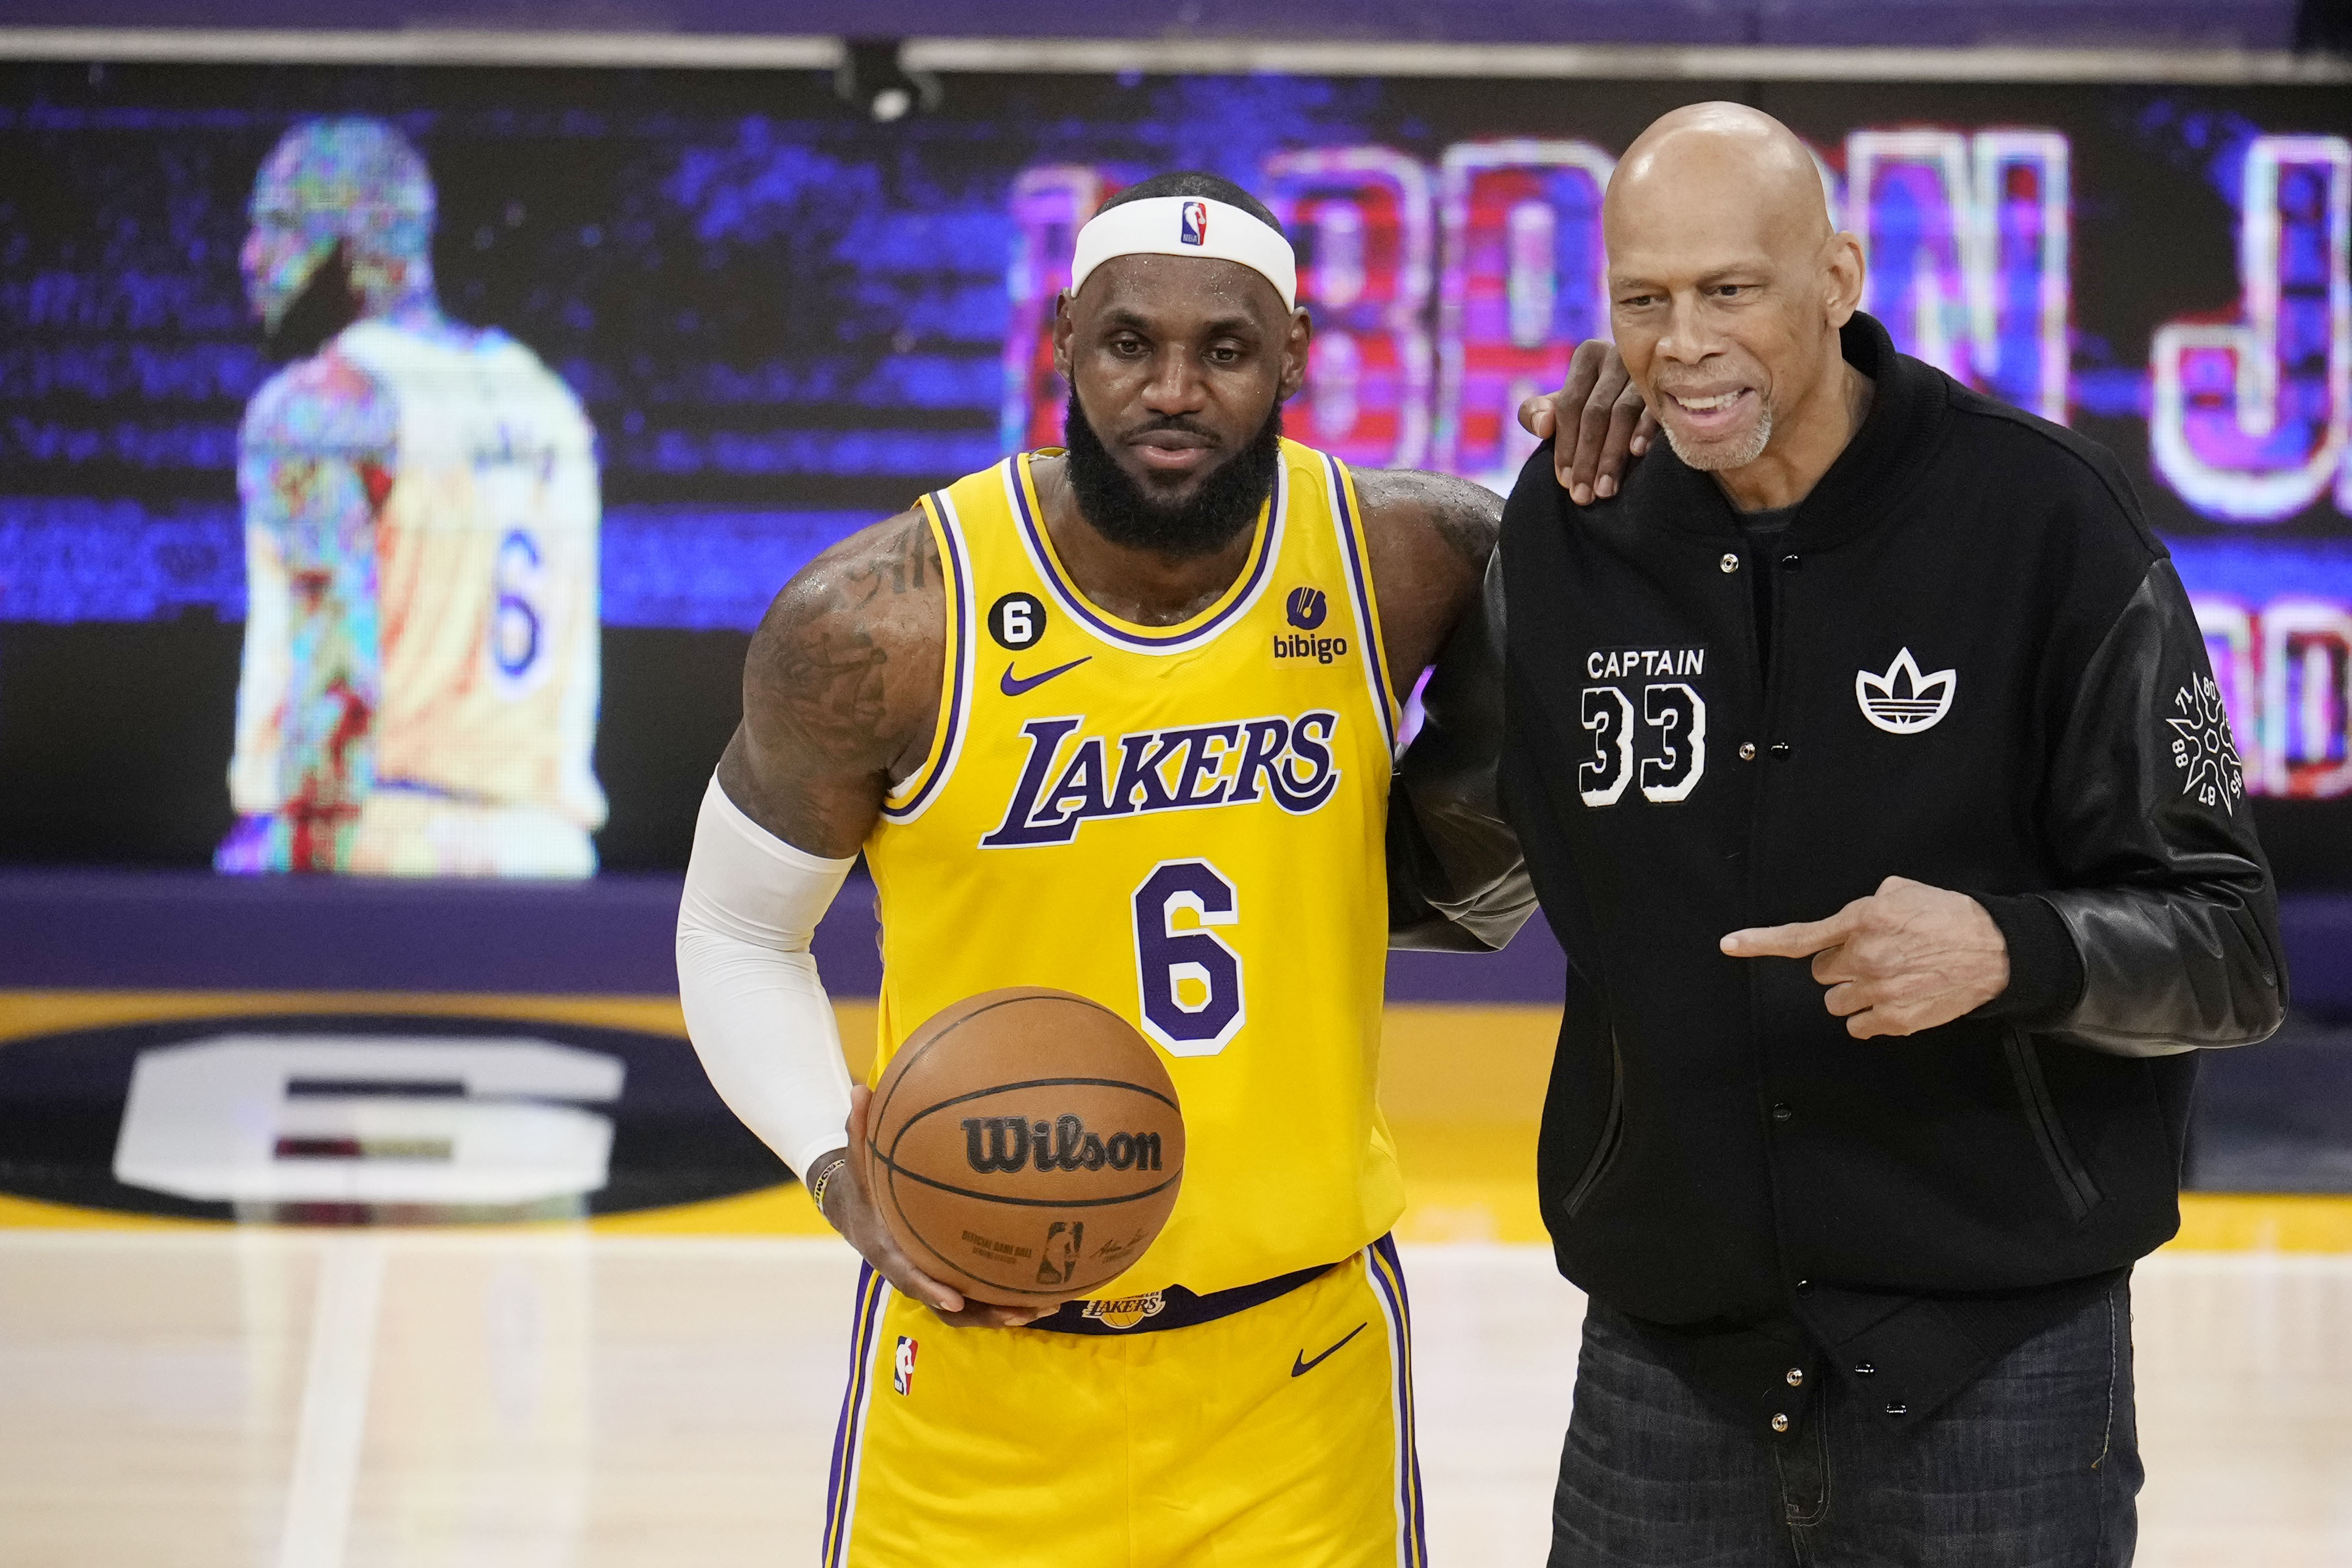 Lakers: LeBron James drew up a play for Lakers and it worked